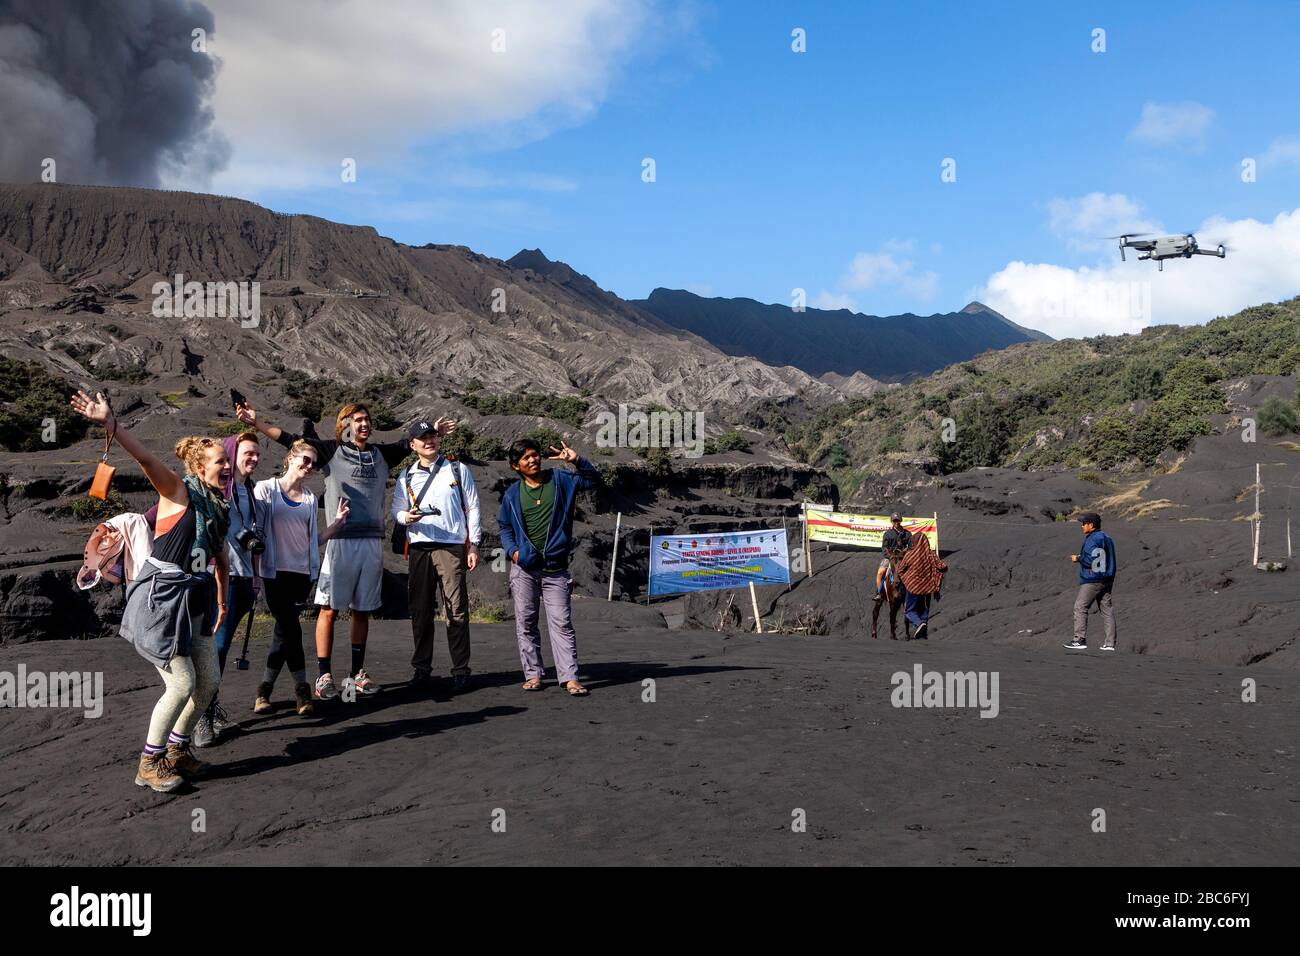 Tourists Pose For A Drone Selfie On The Sea Of Sand, In The Backround Is An Erupting Mount Bromo, Bromo Tengger Semeru National Park, Java, Indonesia Stock Photo